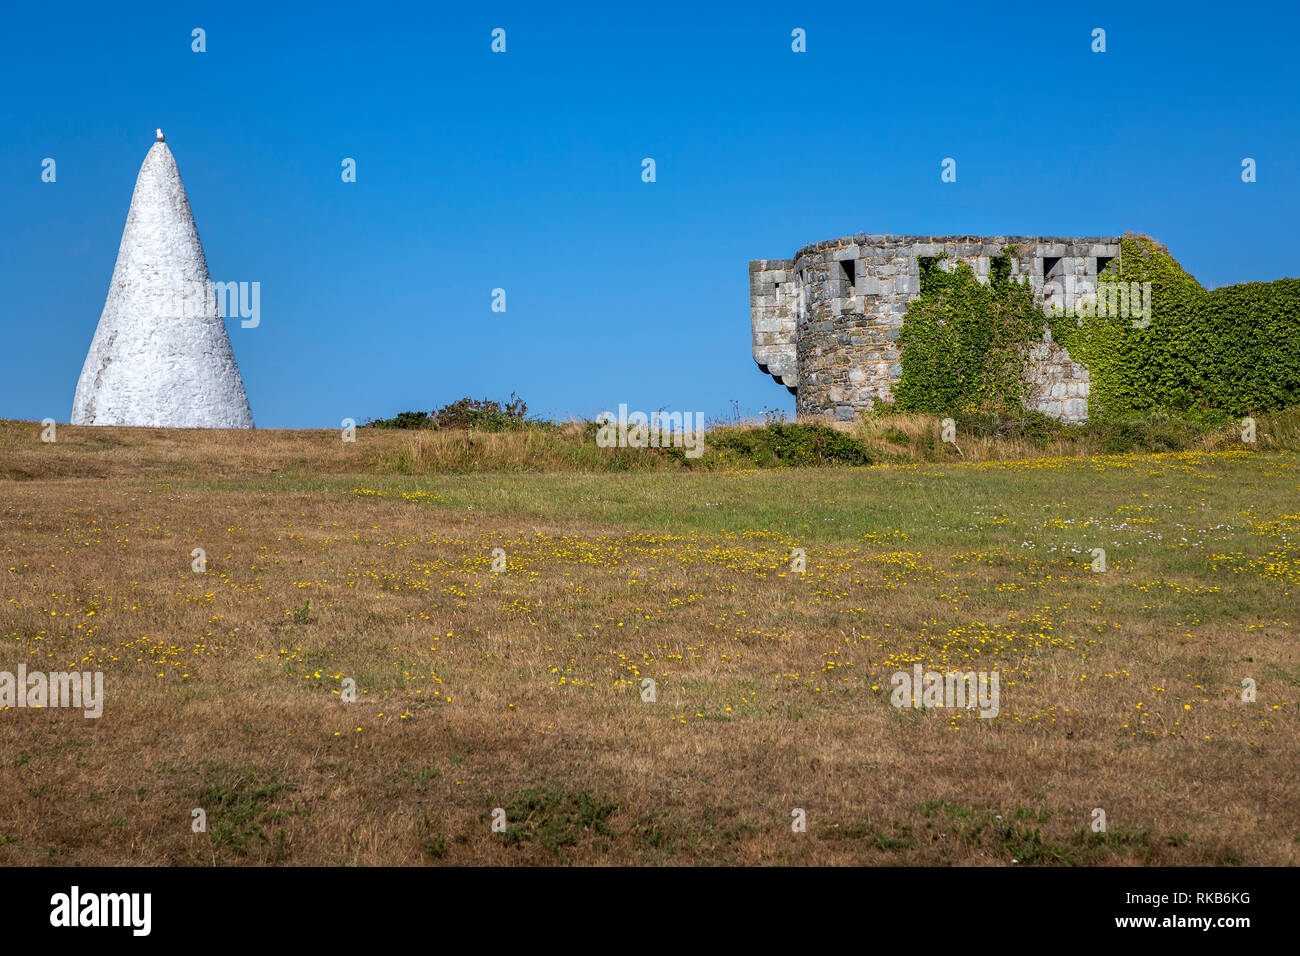 Fort Tourgis on Alderney besides a large white cone landmark used for shipping navigation. Stock Photo